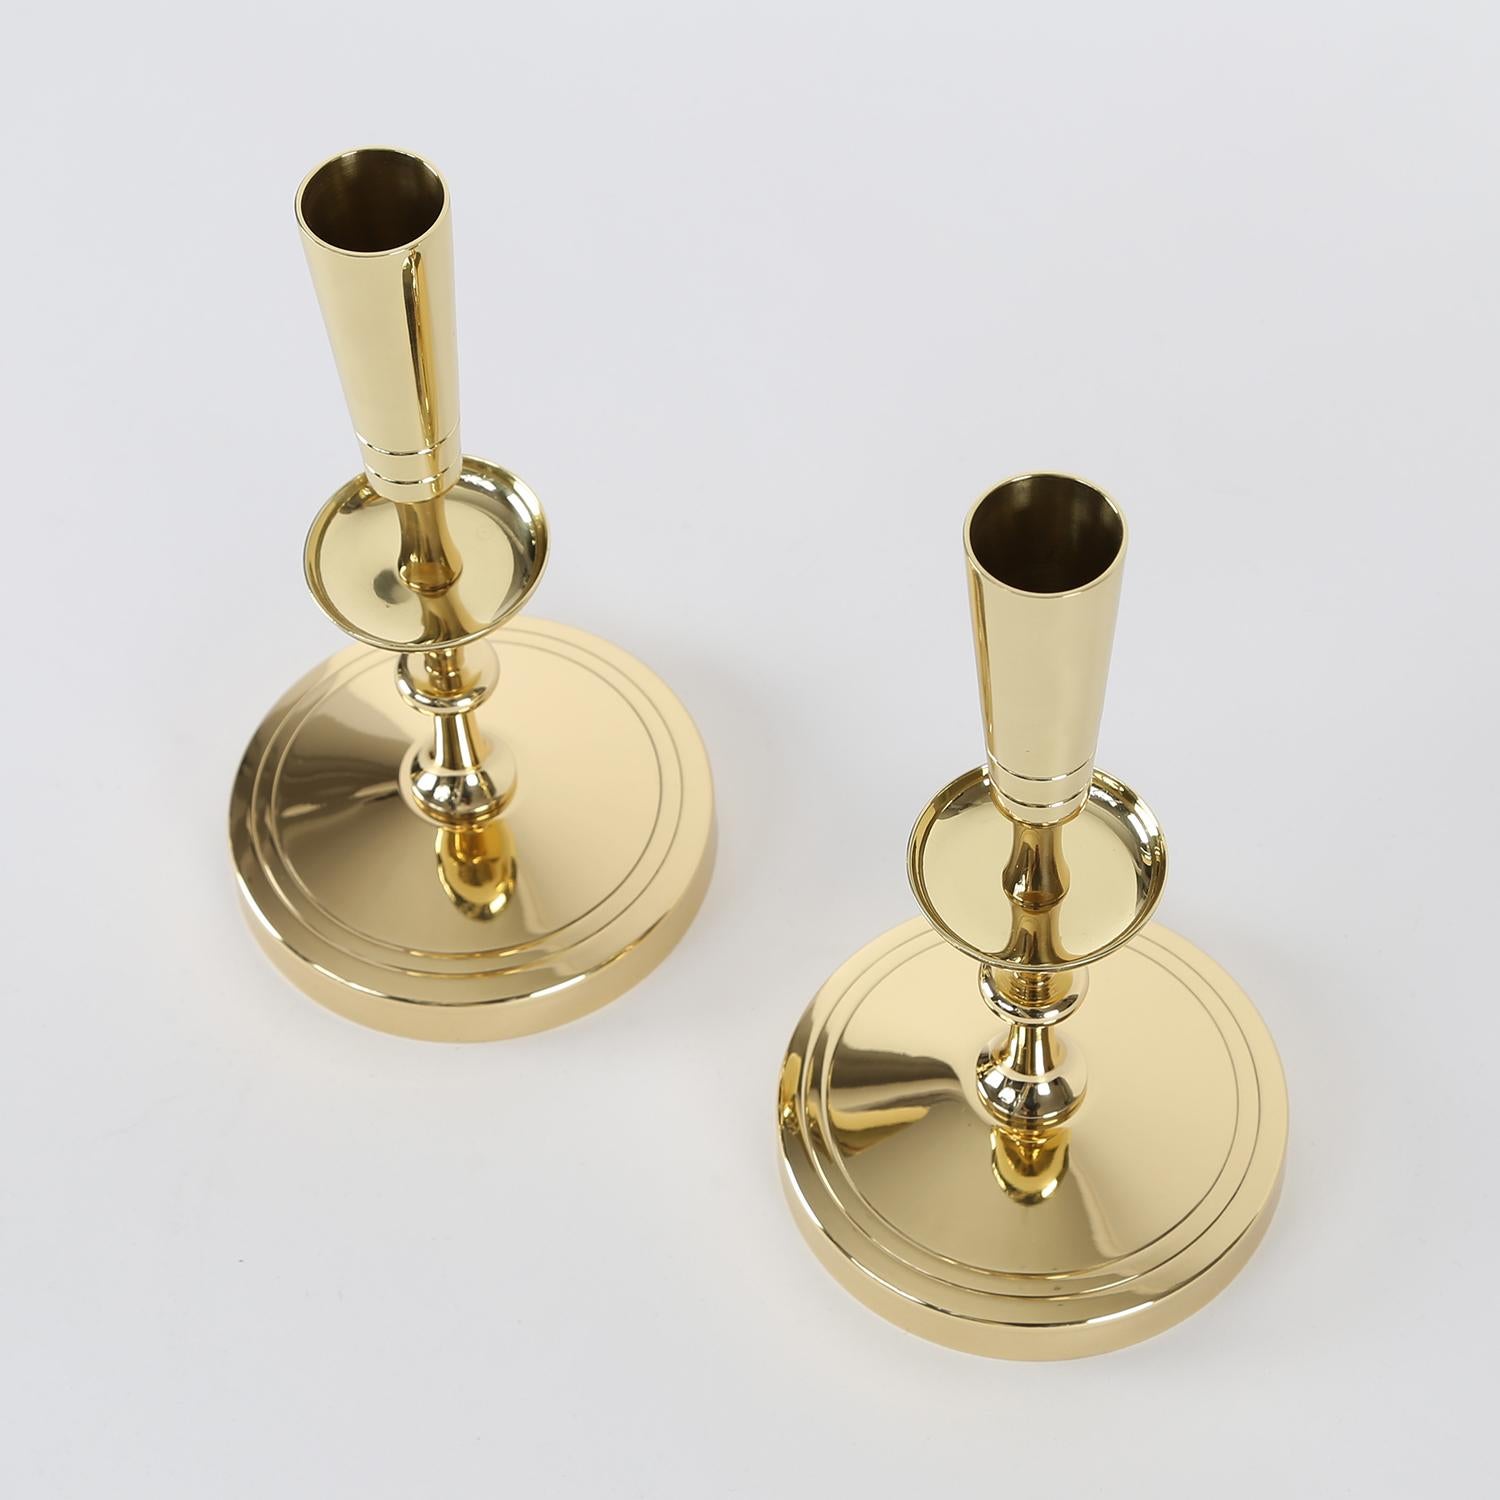 Mid-Century Modern Tommi Parzinger Pair of Candelabra in Polished Brass, 1950s, 'Signed' For Sale